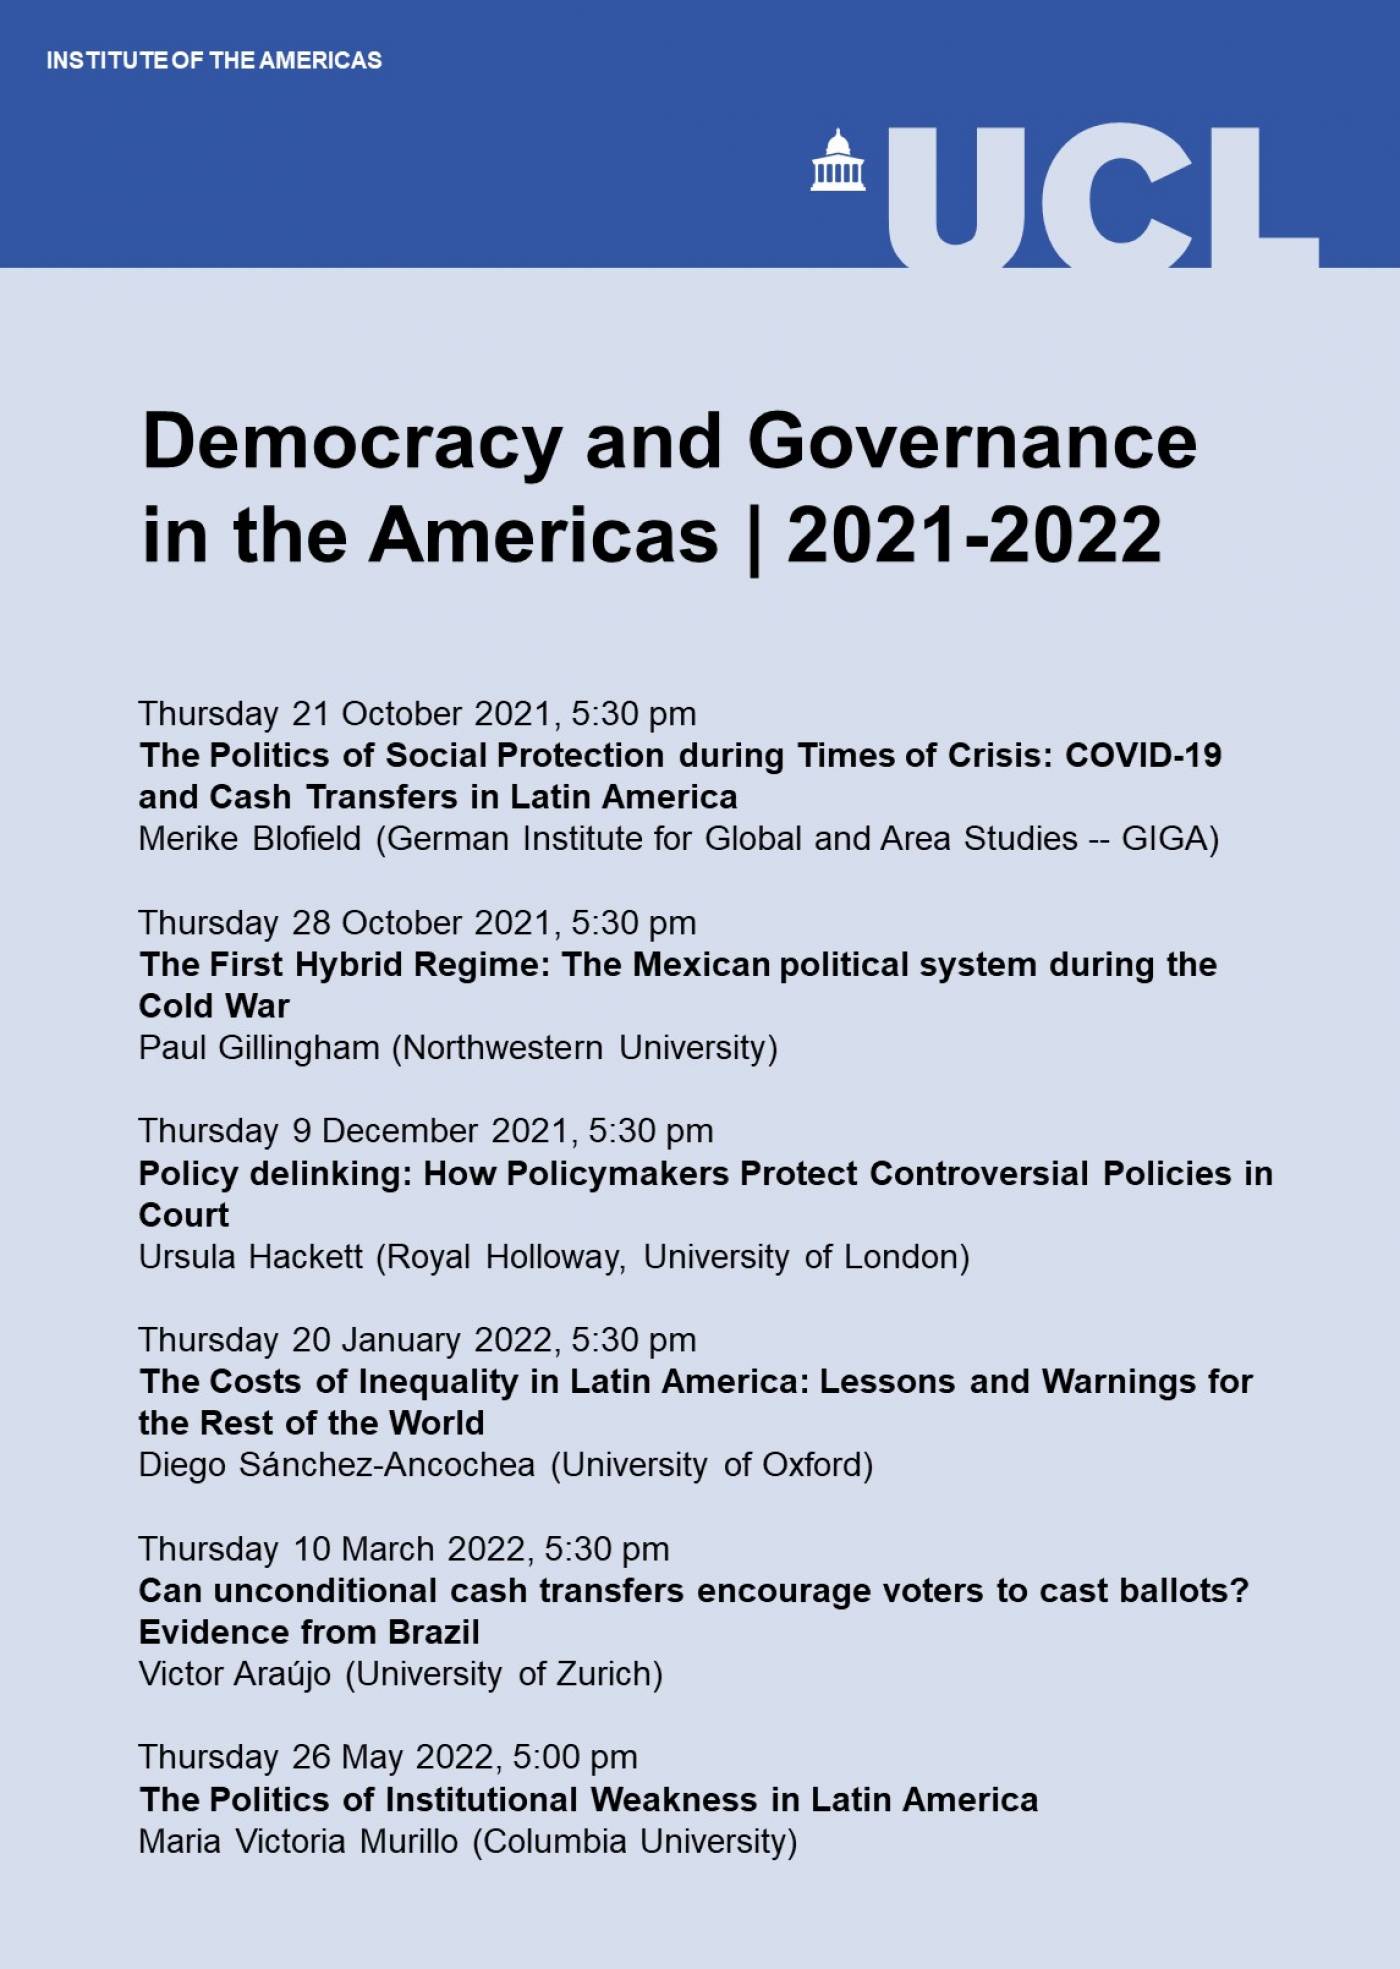 Democracy and Governance in the Americas event series calendar